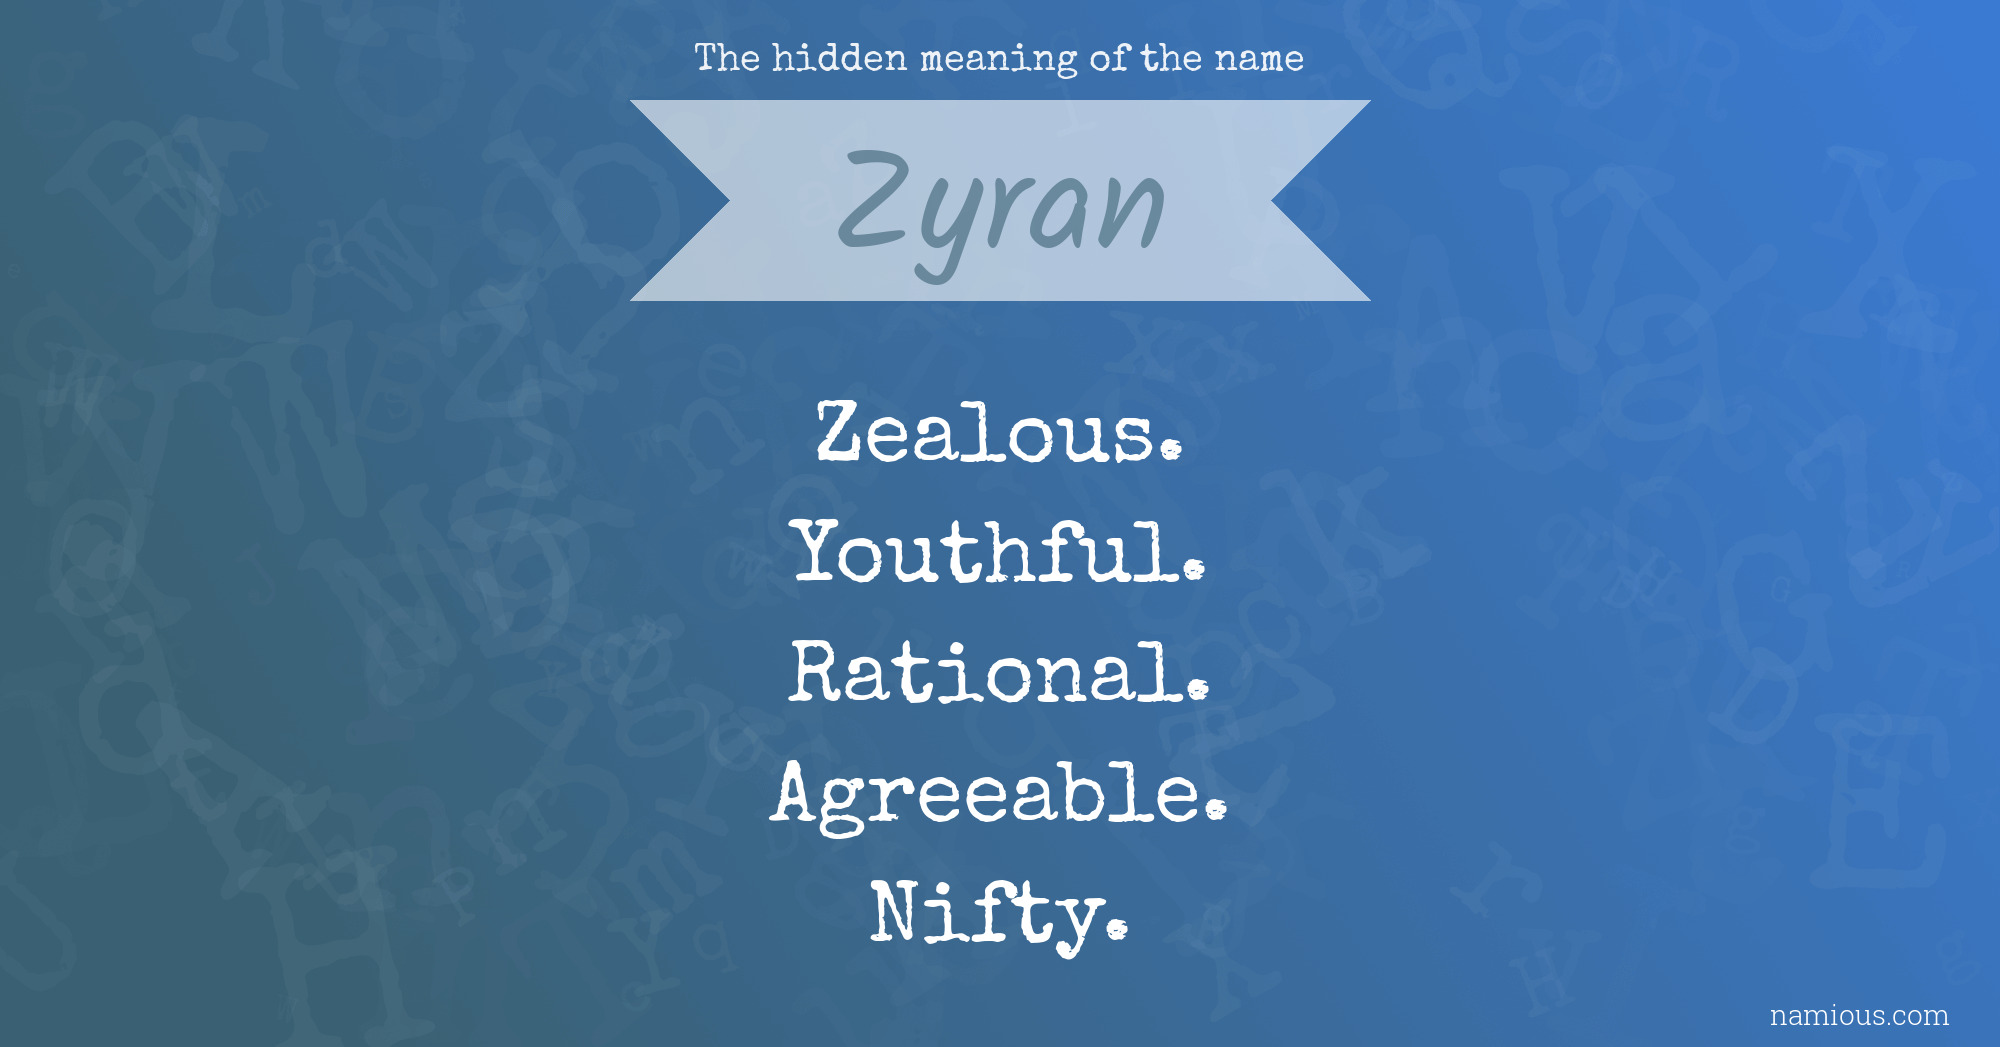 The hidden meaning of the name Zyran